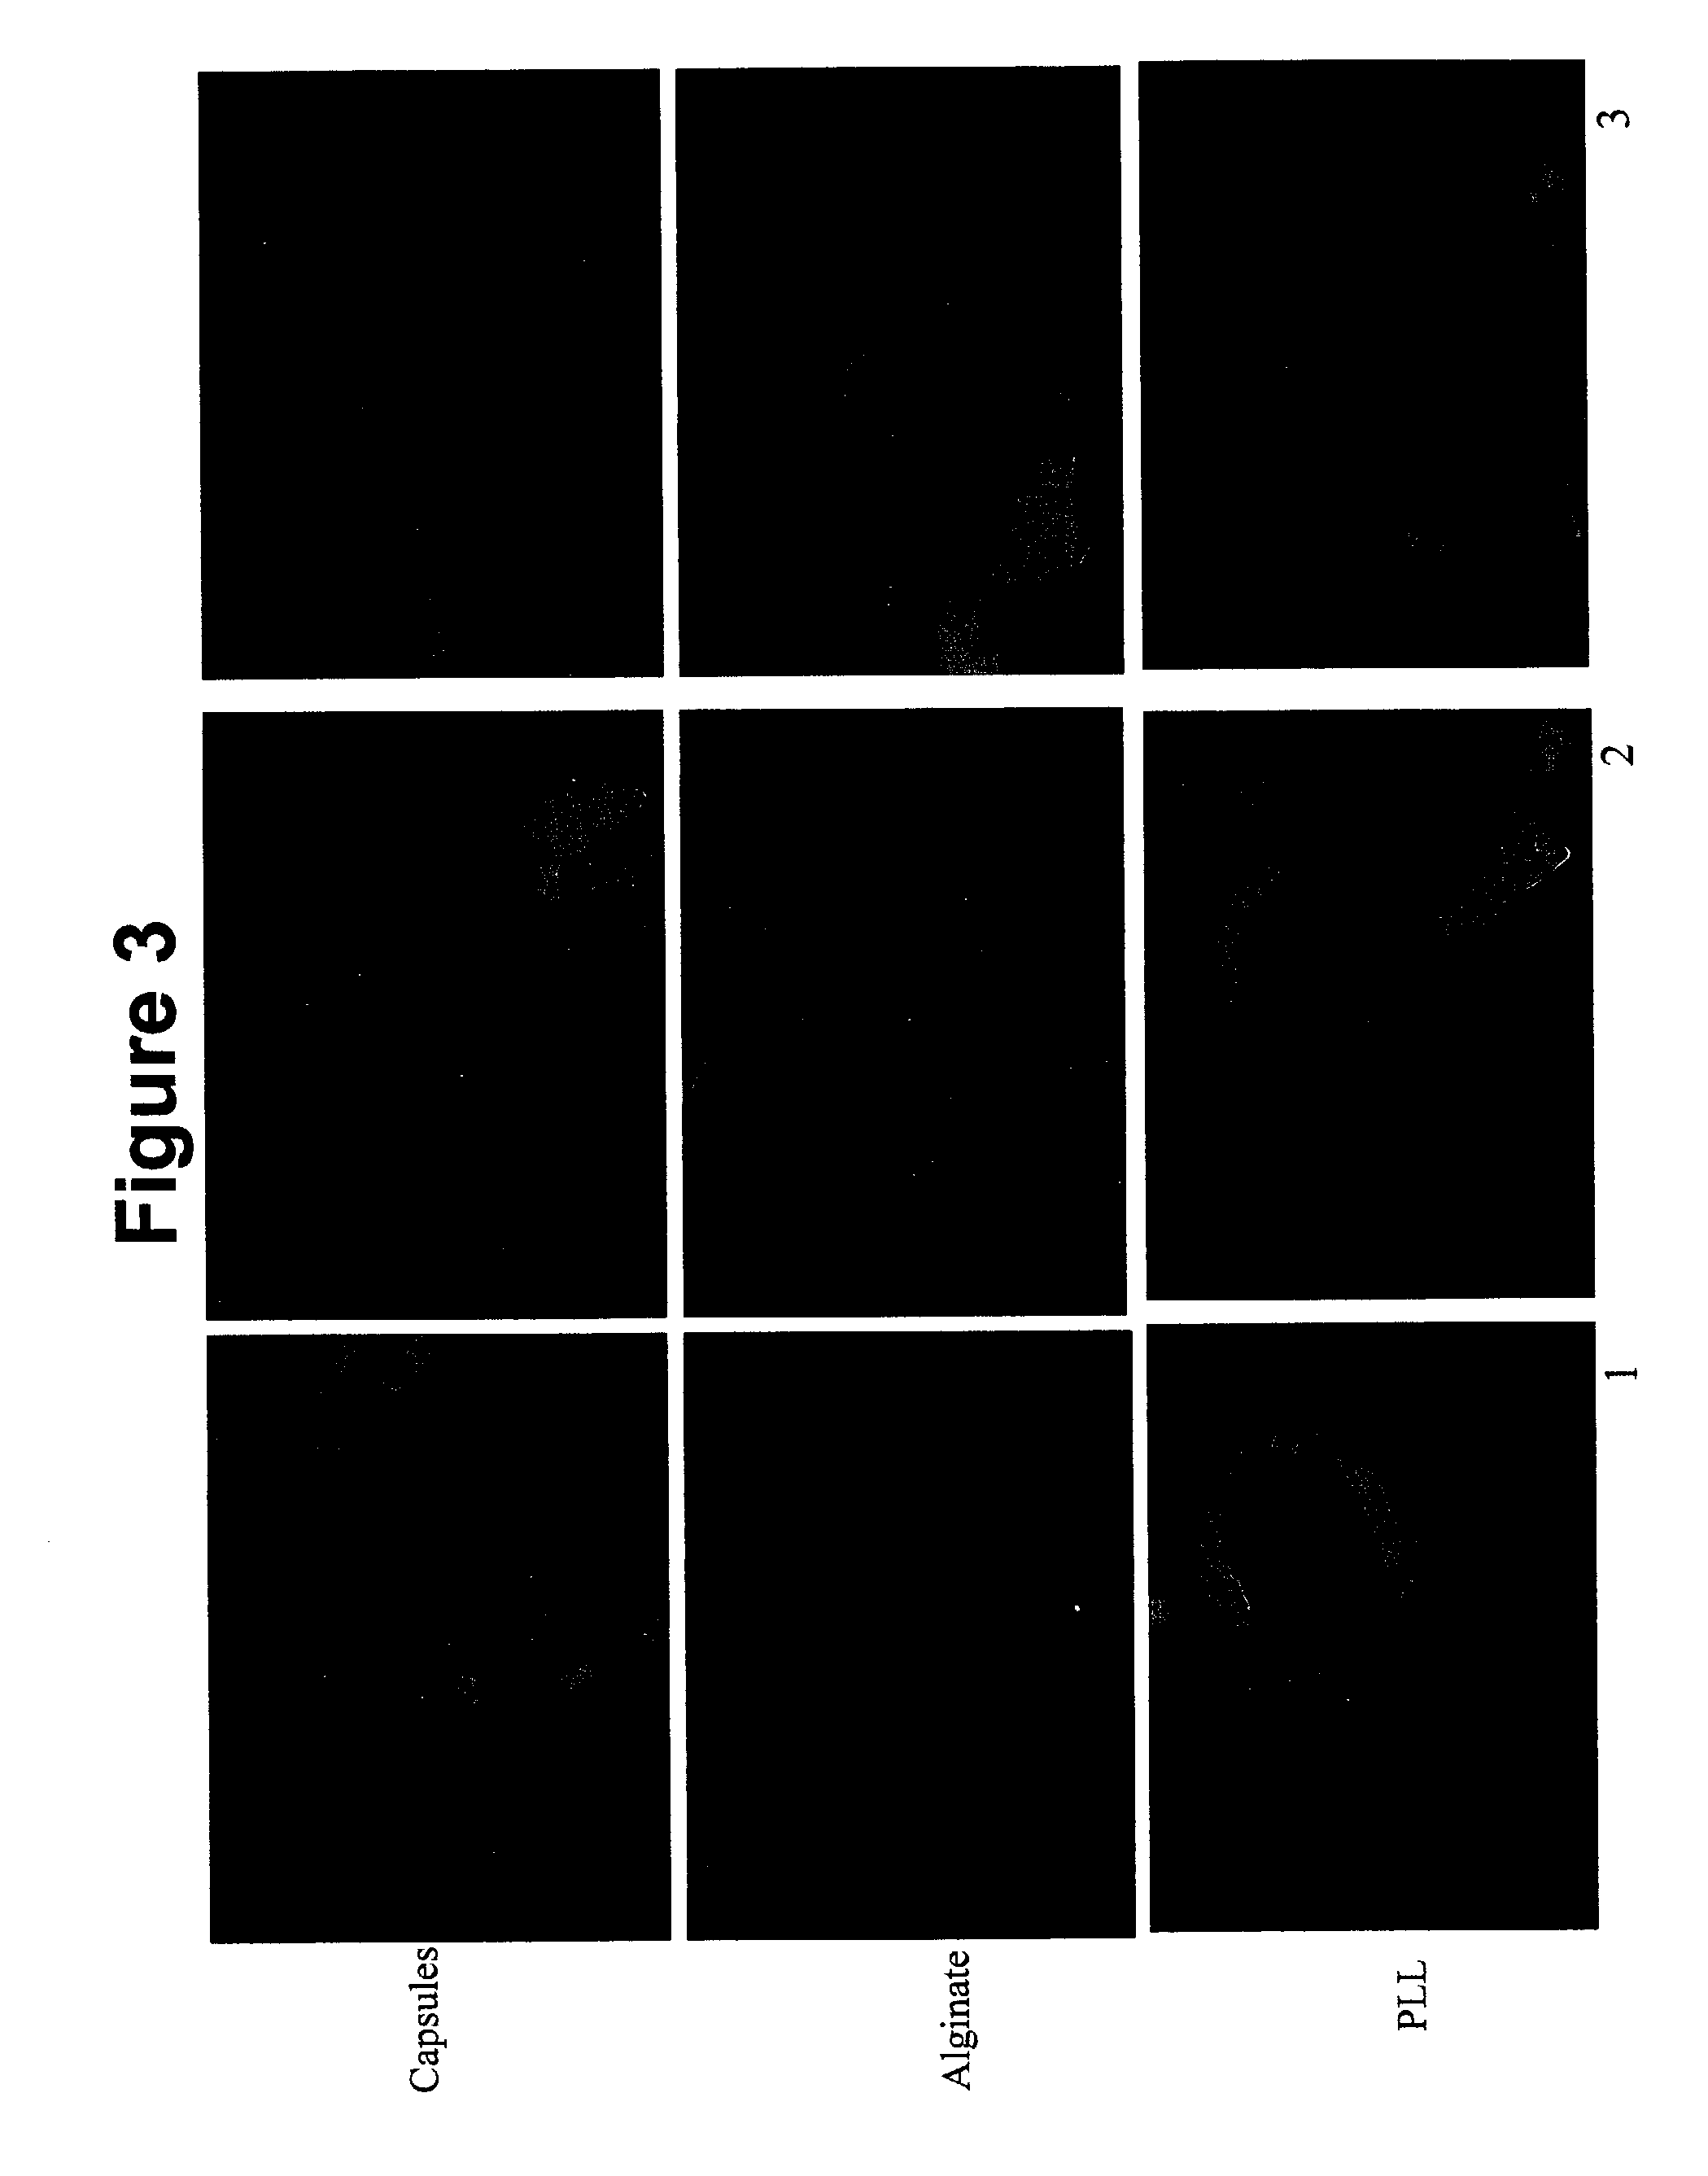 Oral administration of therapeutic agent coupled to transporting agent